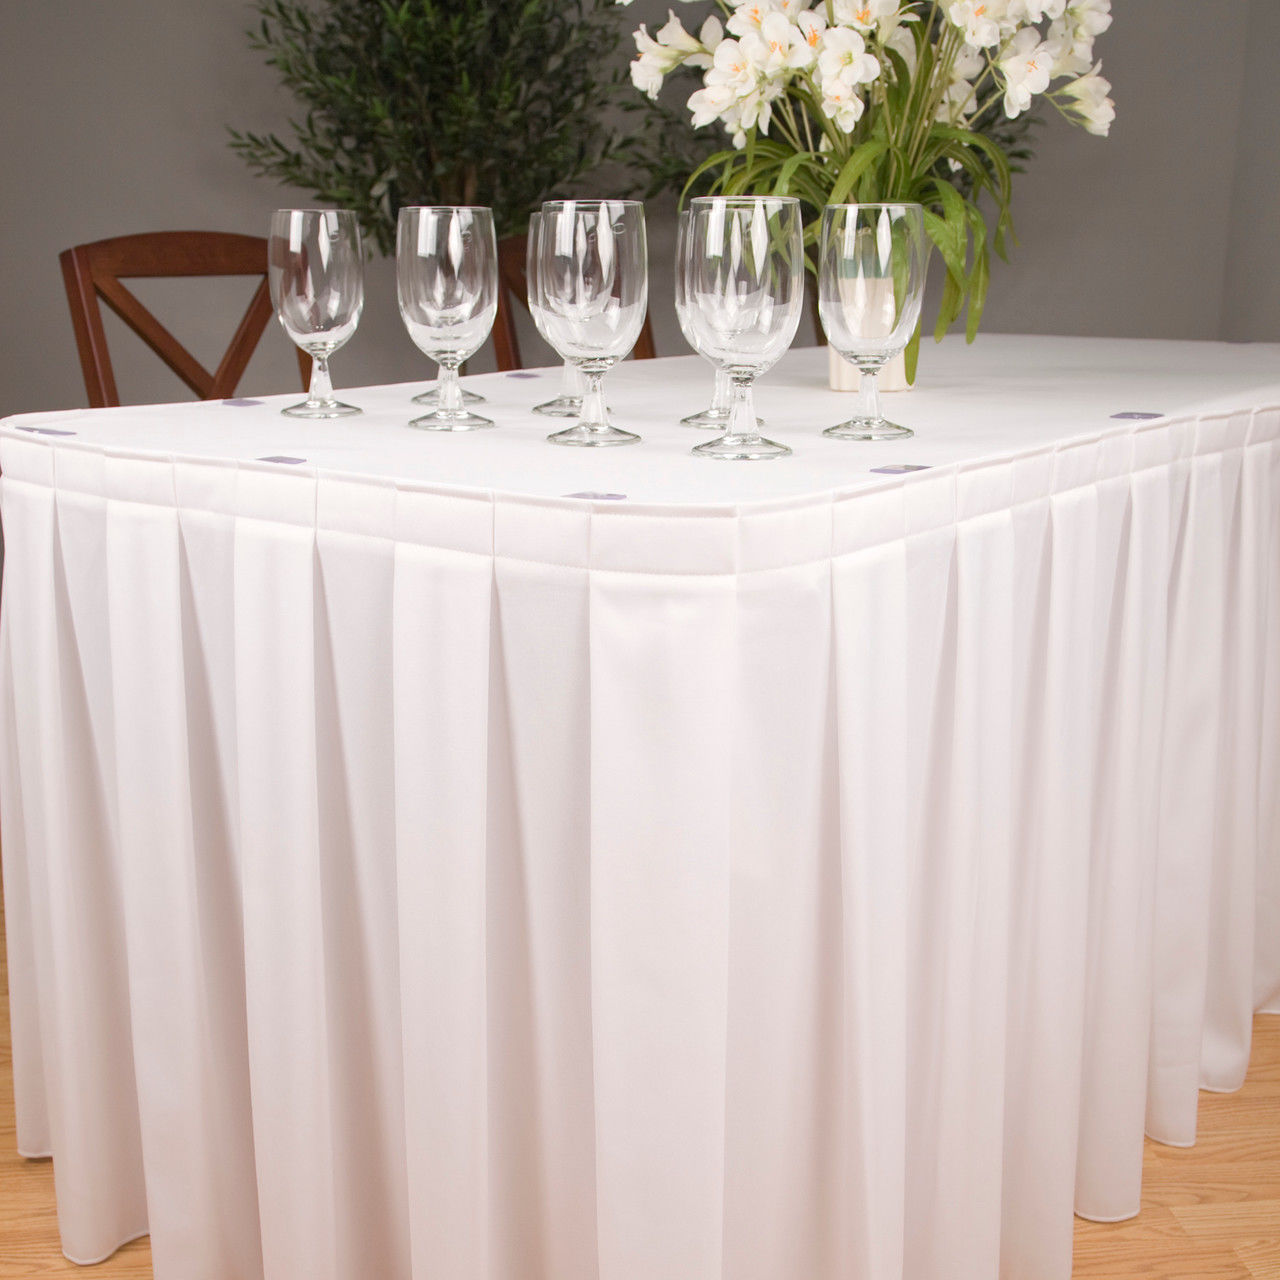 What are the key features of the Classically Tailored Round Table Skirts?